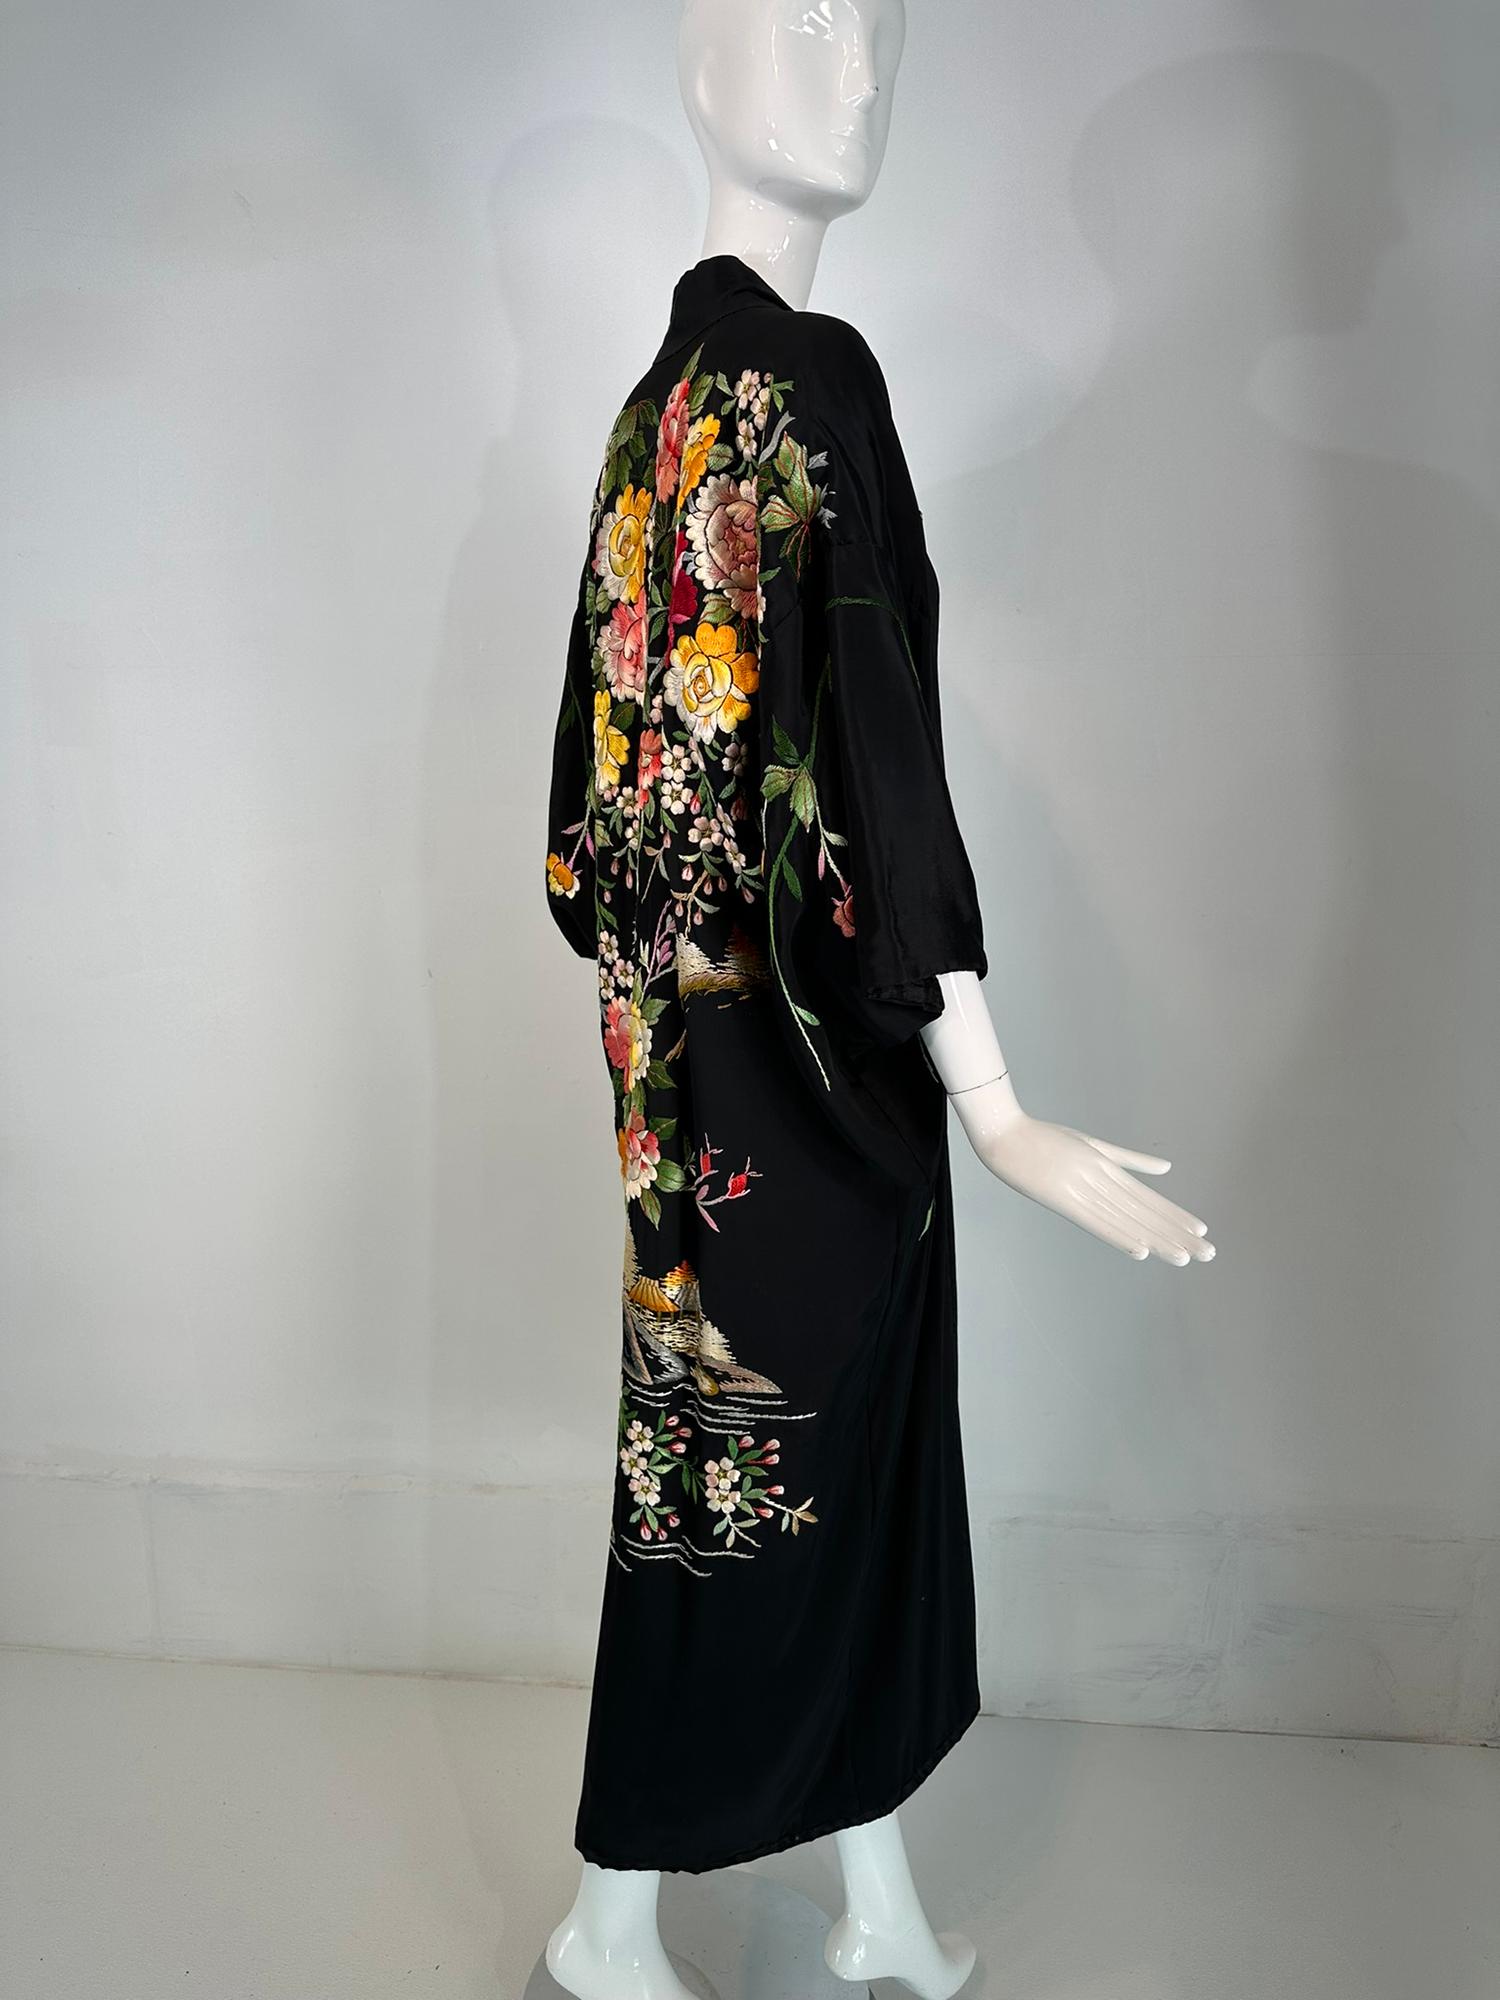 Vintage Black Rayon Heavily Floral Embroidered Kimono Robe 1930s-40s For Sale 7